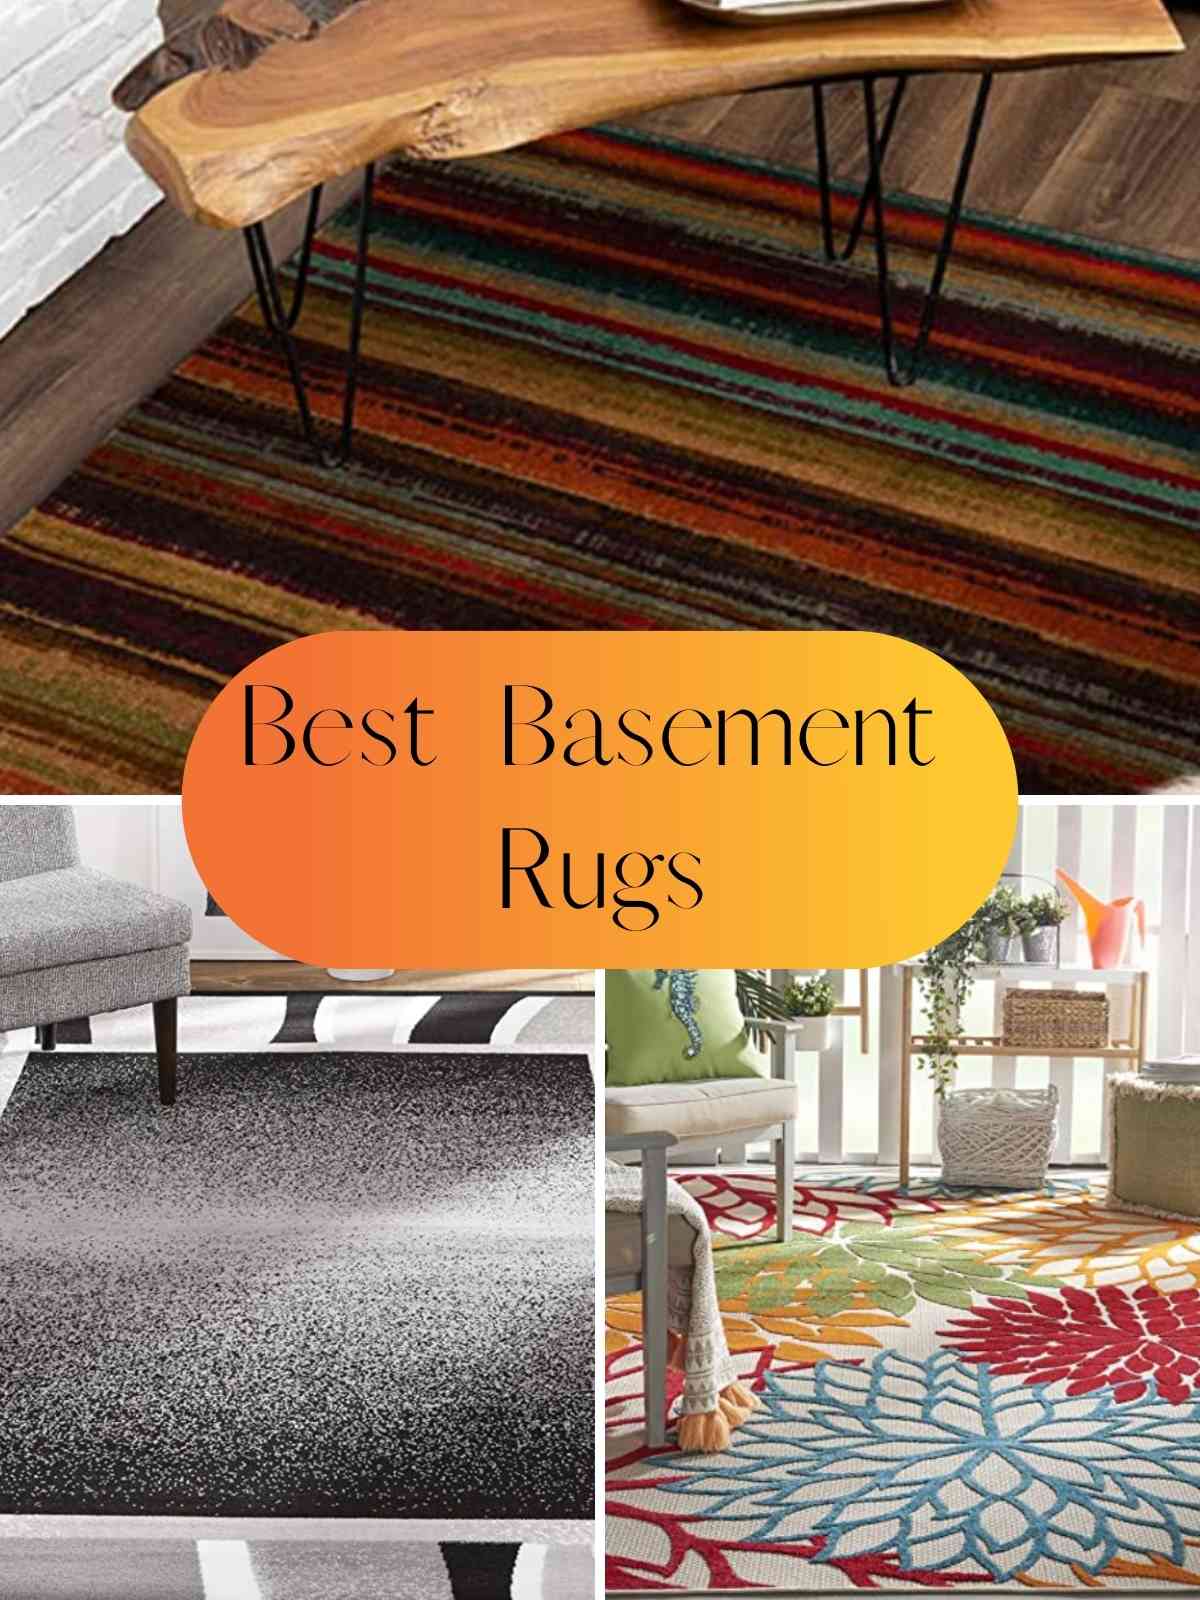 Best Basement Rugs To Handle humidity